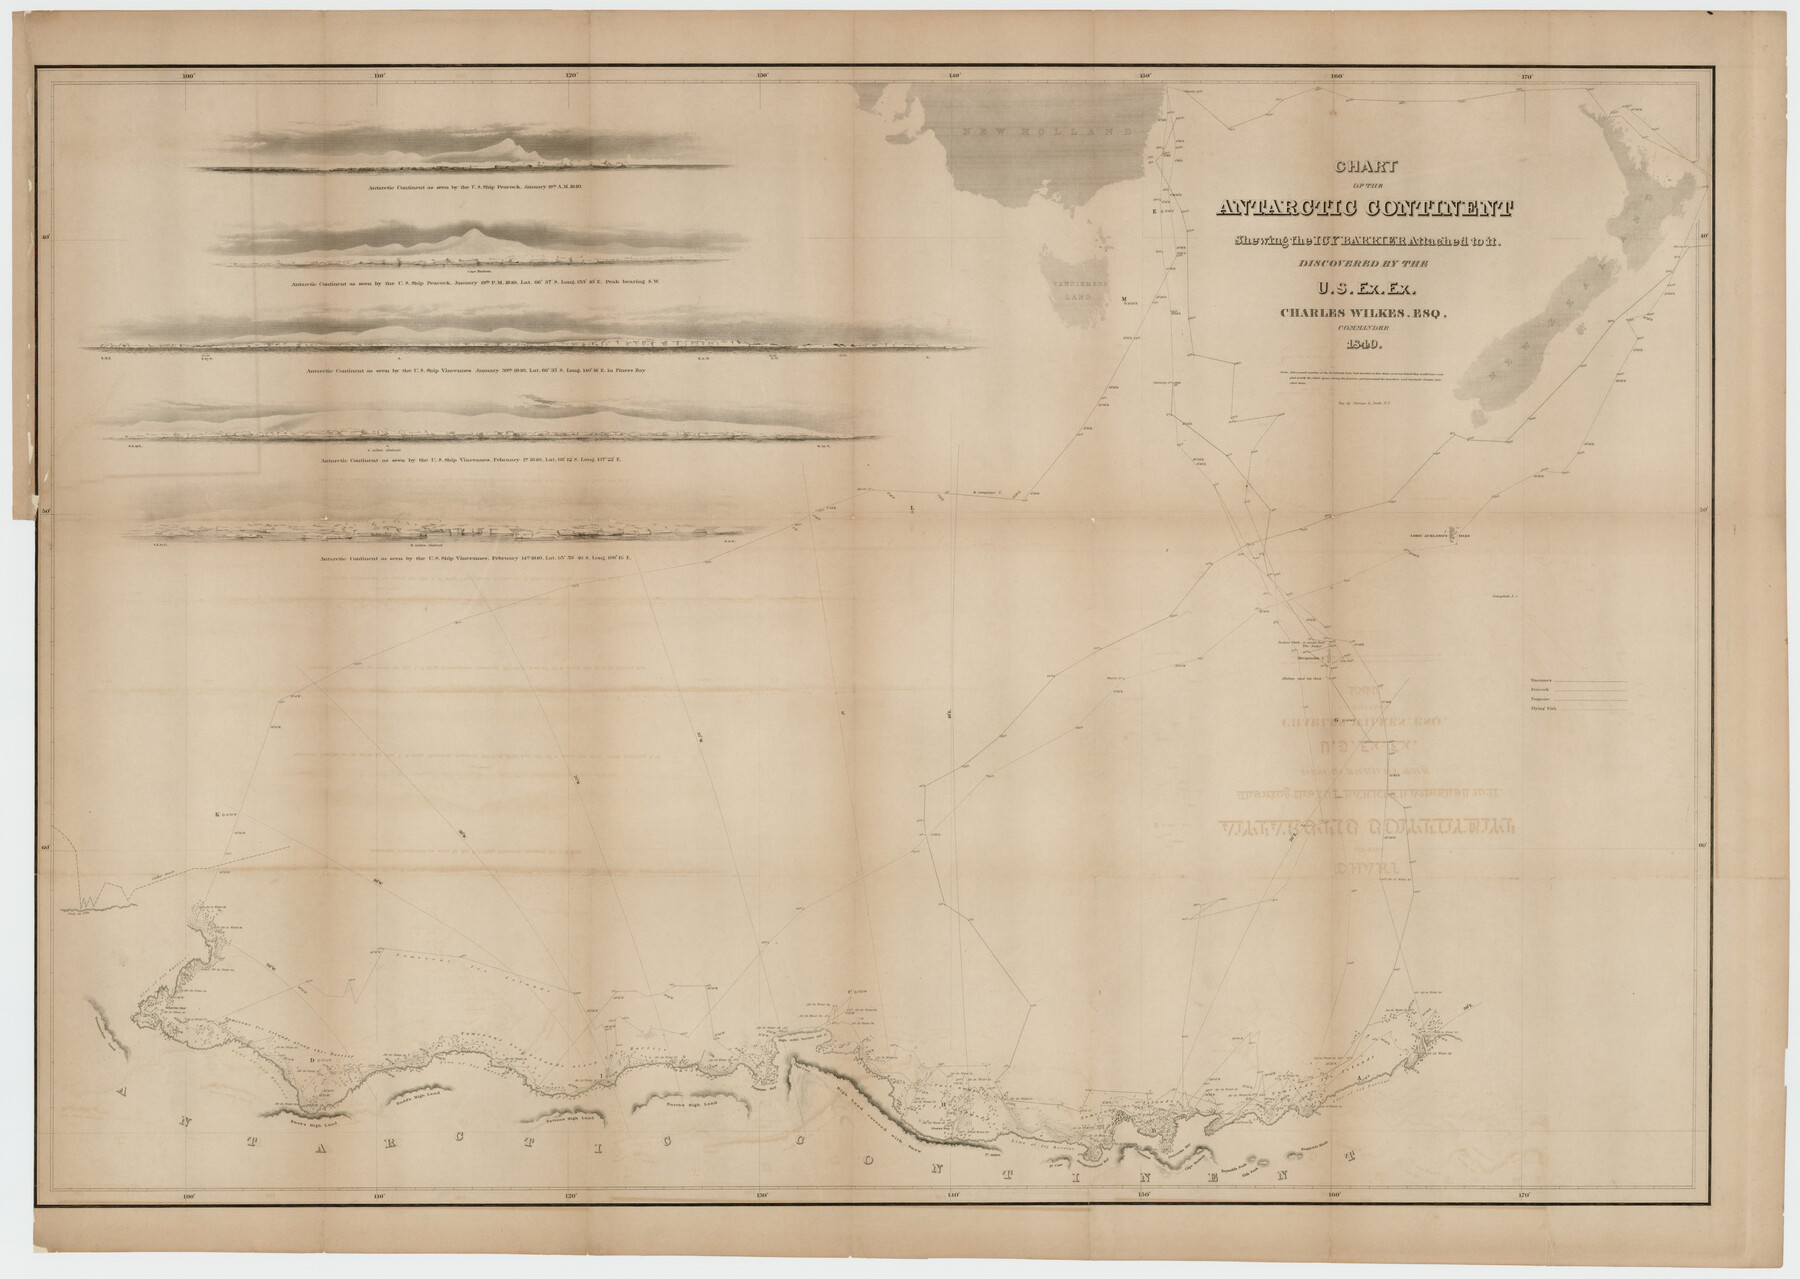 94058, Chart of the Antarctic Continent shewing the icy barrier attached to it discovered by the U.S. Ex. Ex., Rees-Jones Digital Map Collection